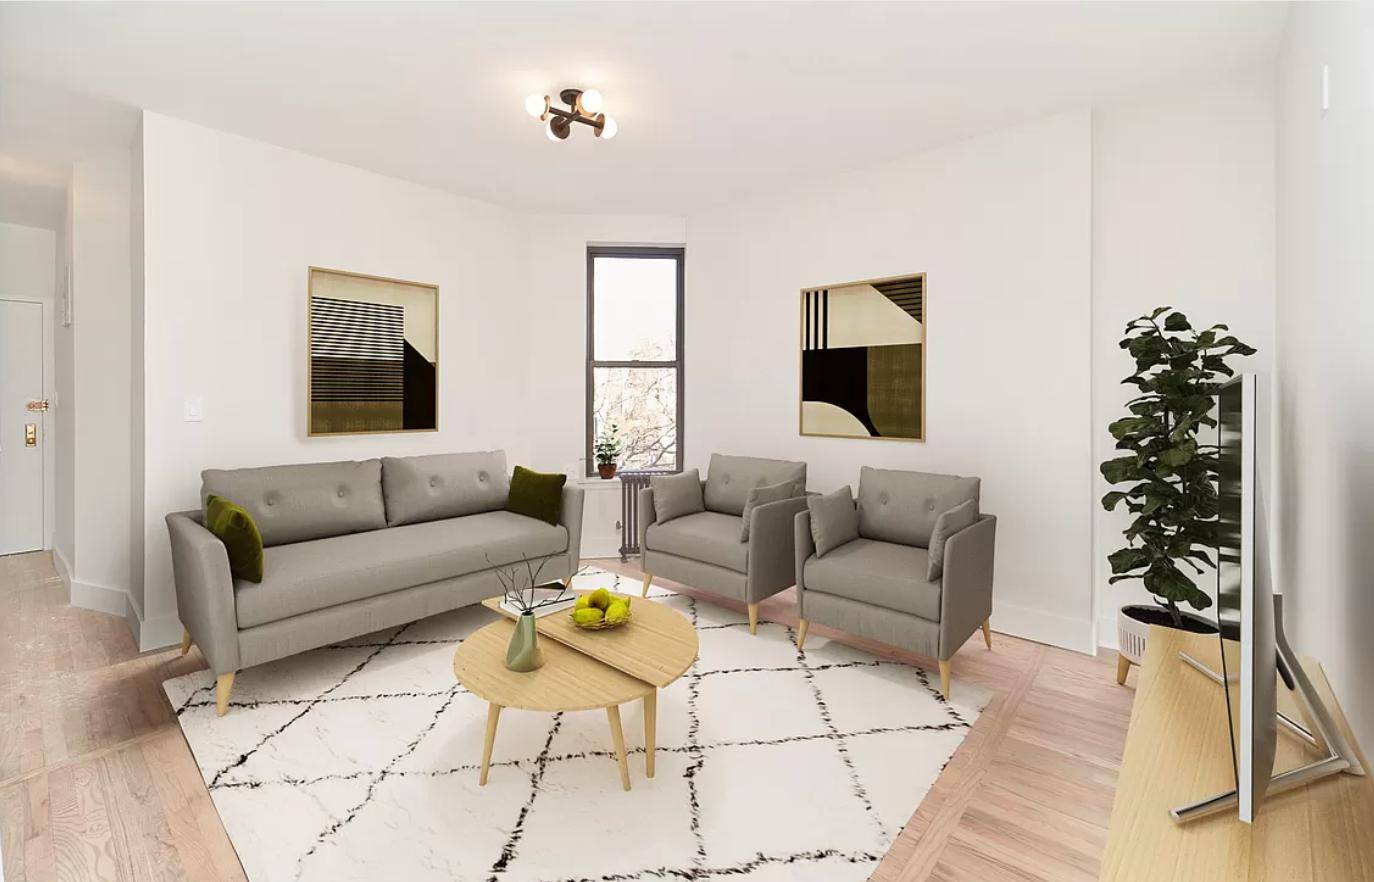 306 East 5th Street is a luxury walkup building located in the heart of The East VillageApartments Features Queen Sized Bedrooms Dishwasher Hardwood Floors Marble Counter tops Matte Black Appliances ...